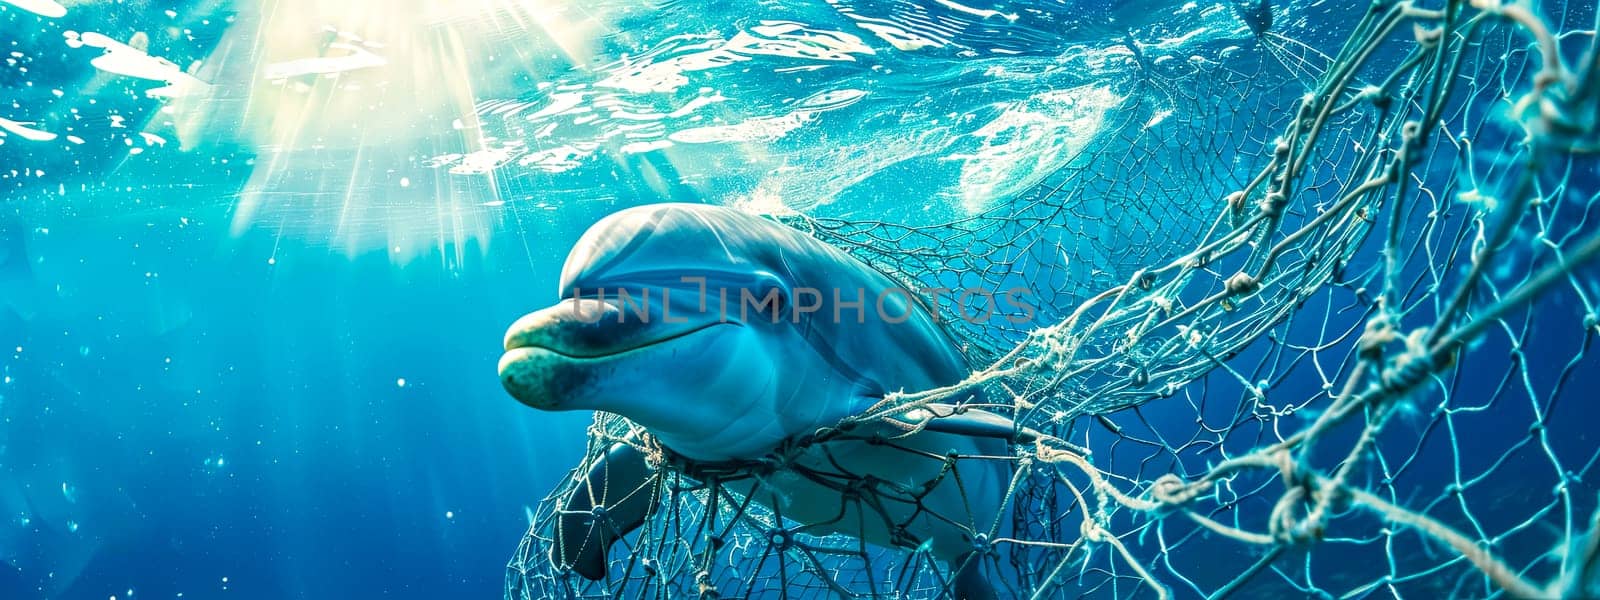 Dolphin entrapped in ocean fishing net, copy space by Edophoto